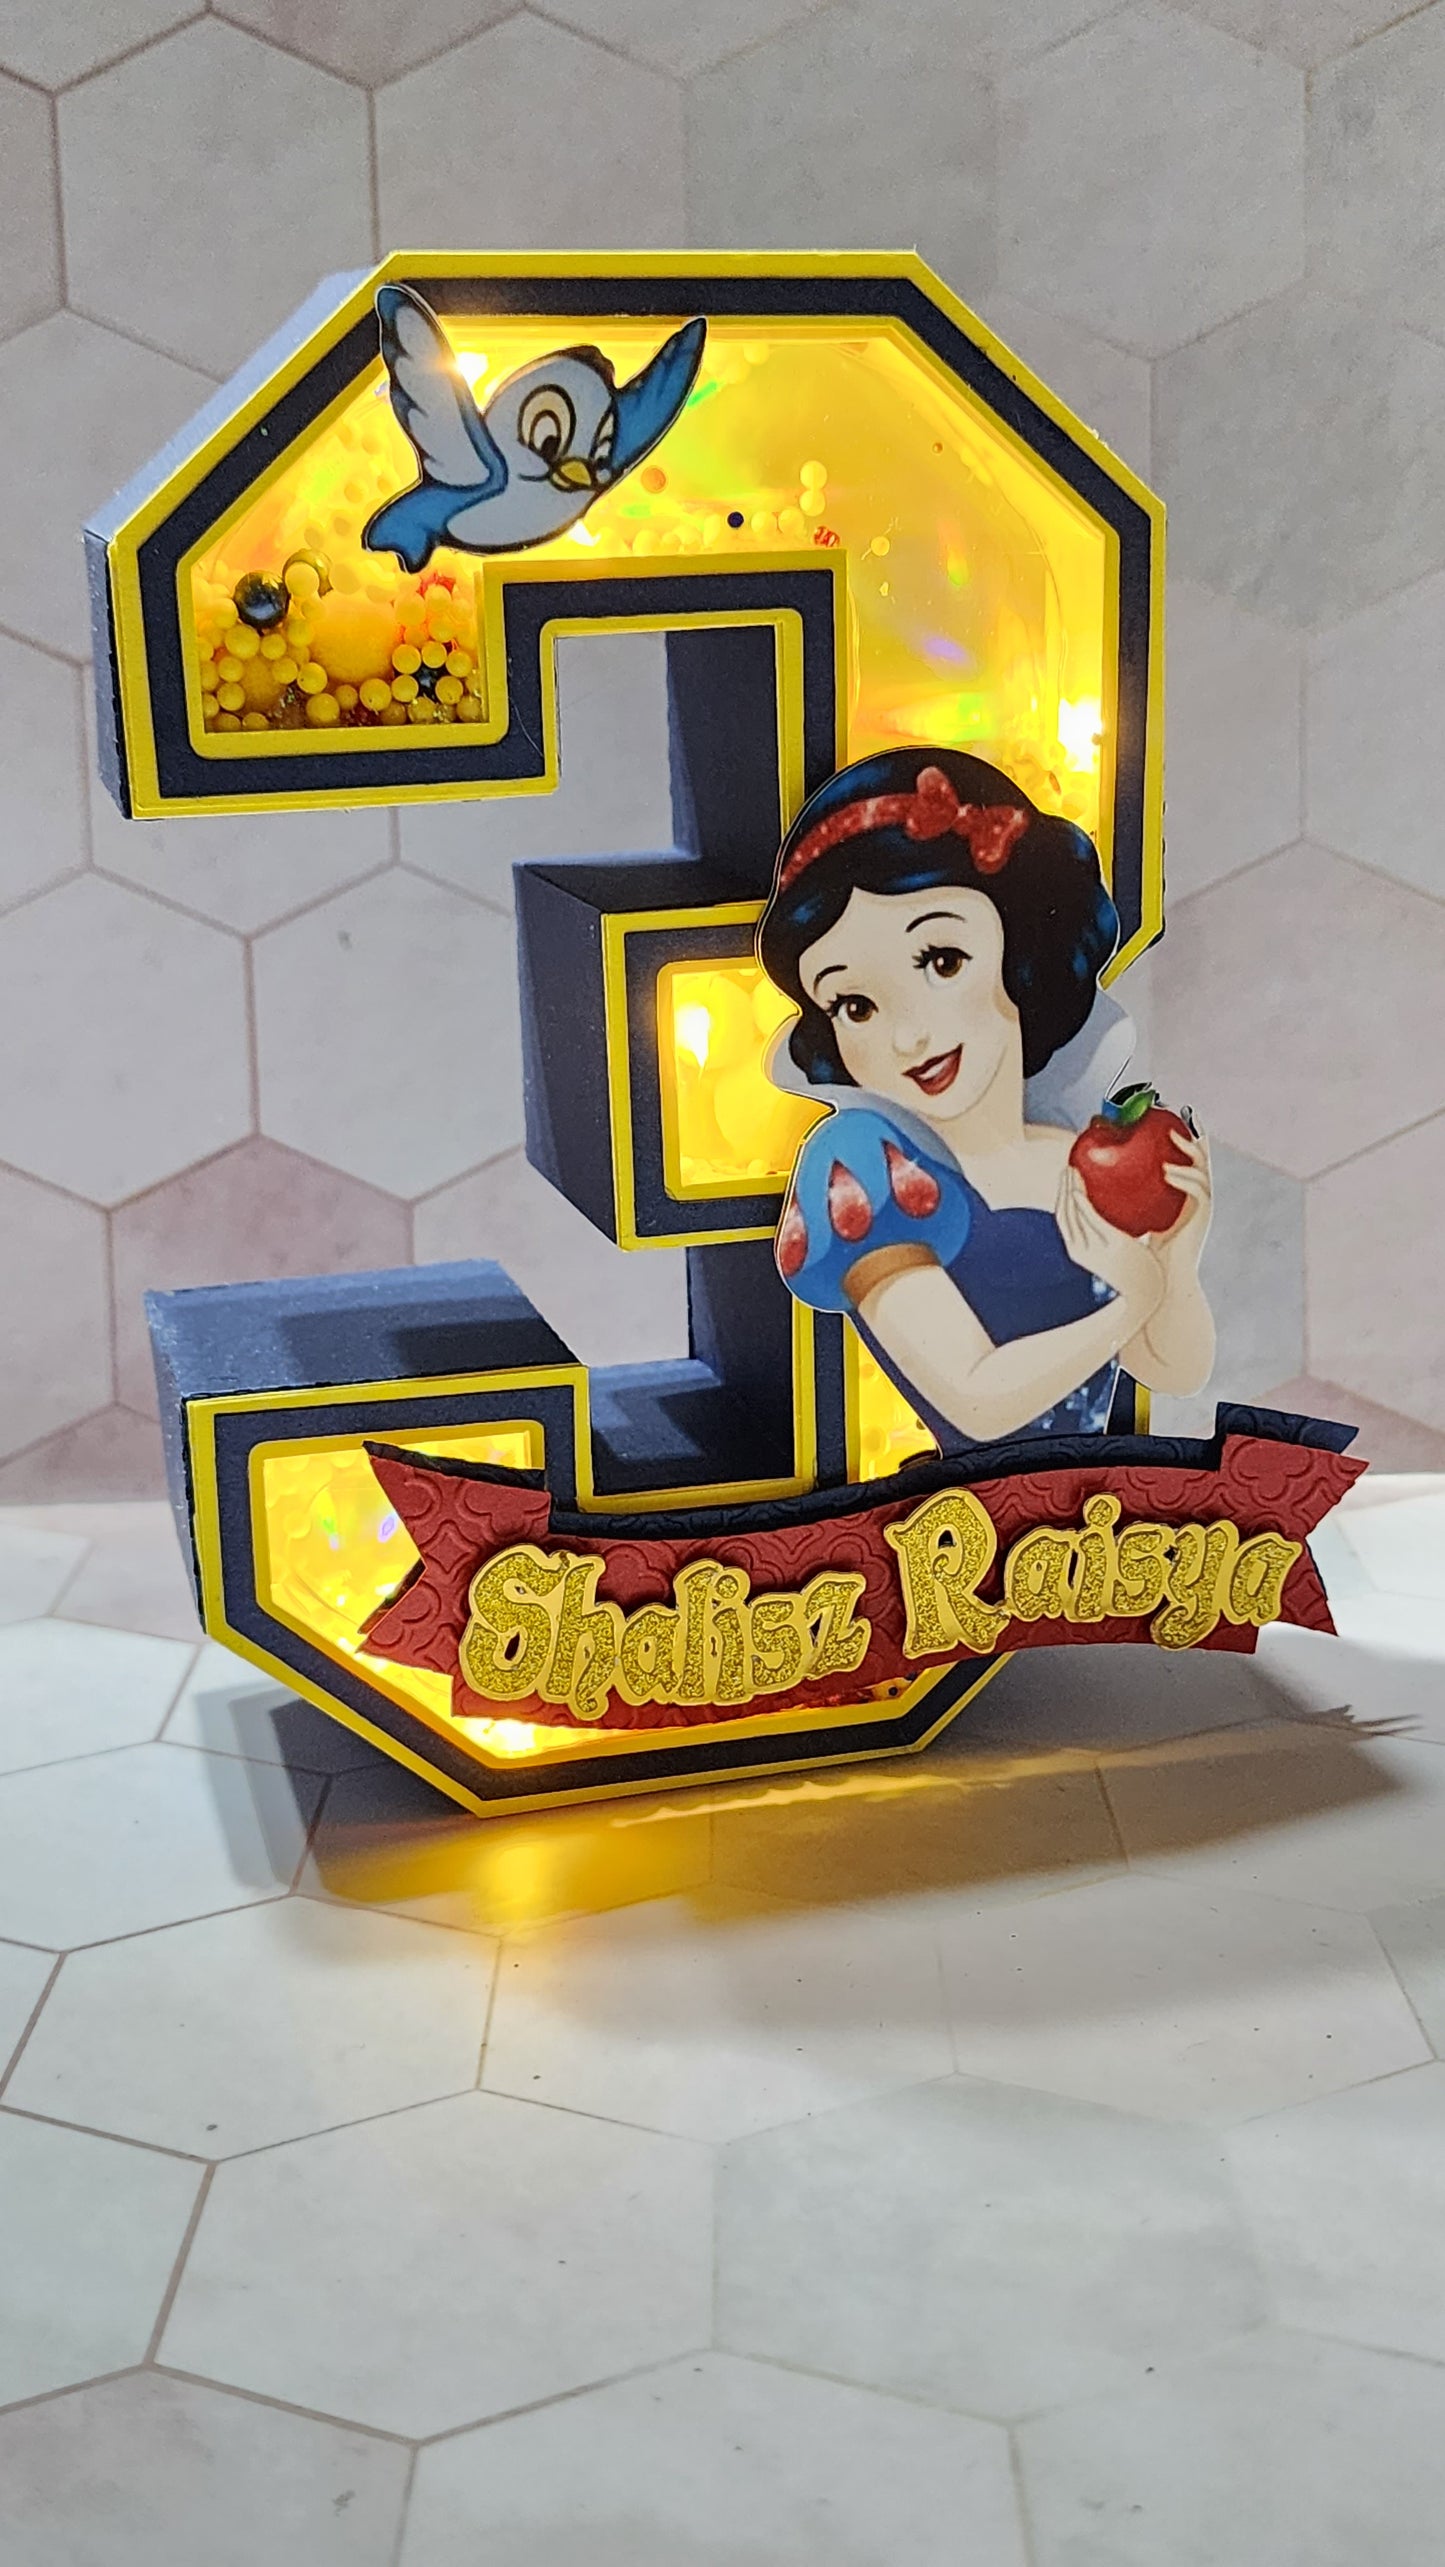 3D Letter and Number Block Standard Size - Snow White